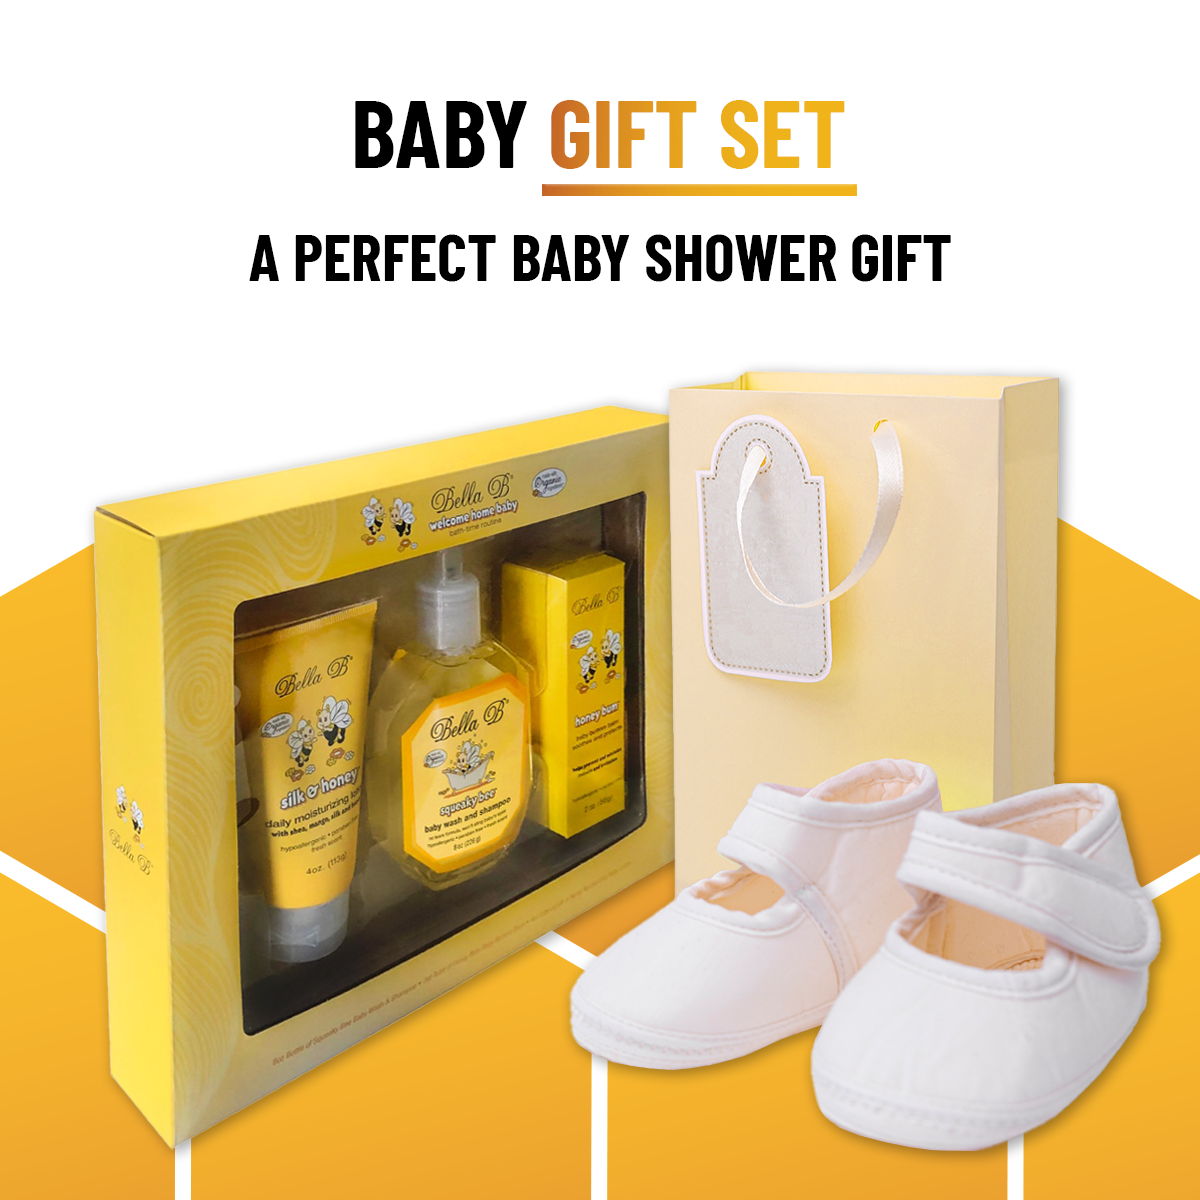 It's a New Bee! Welcome Baby Gift Set